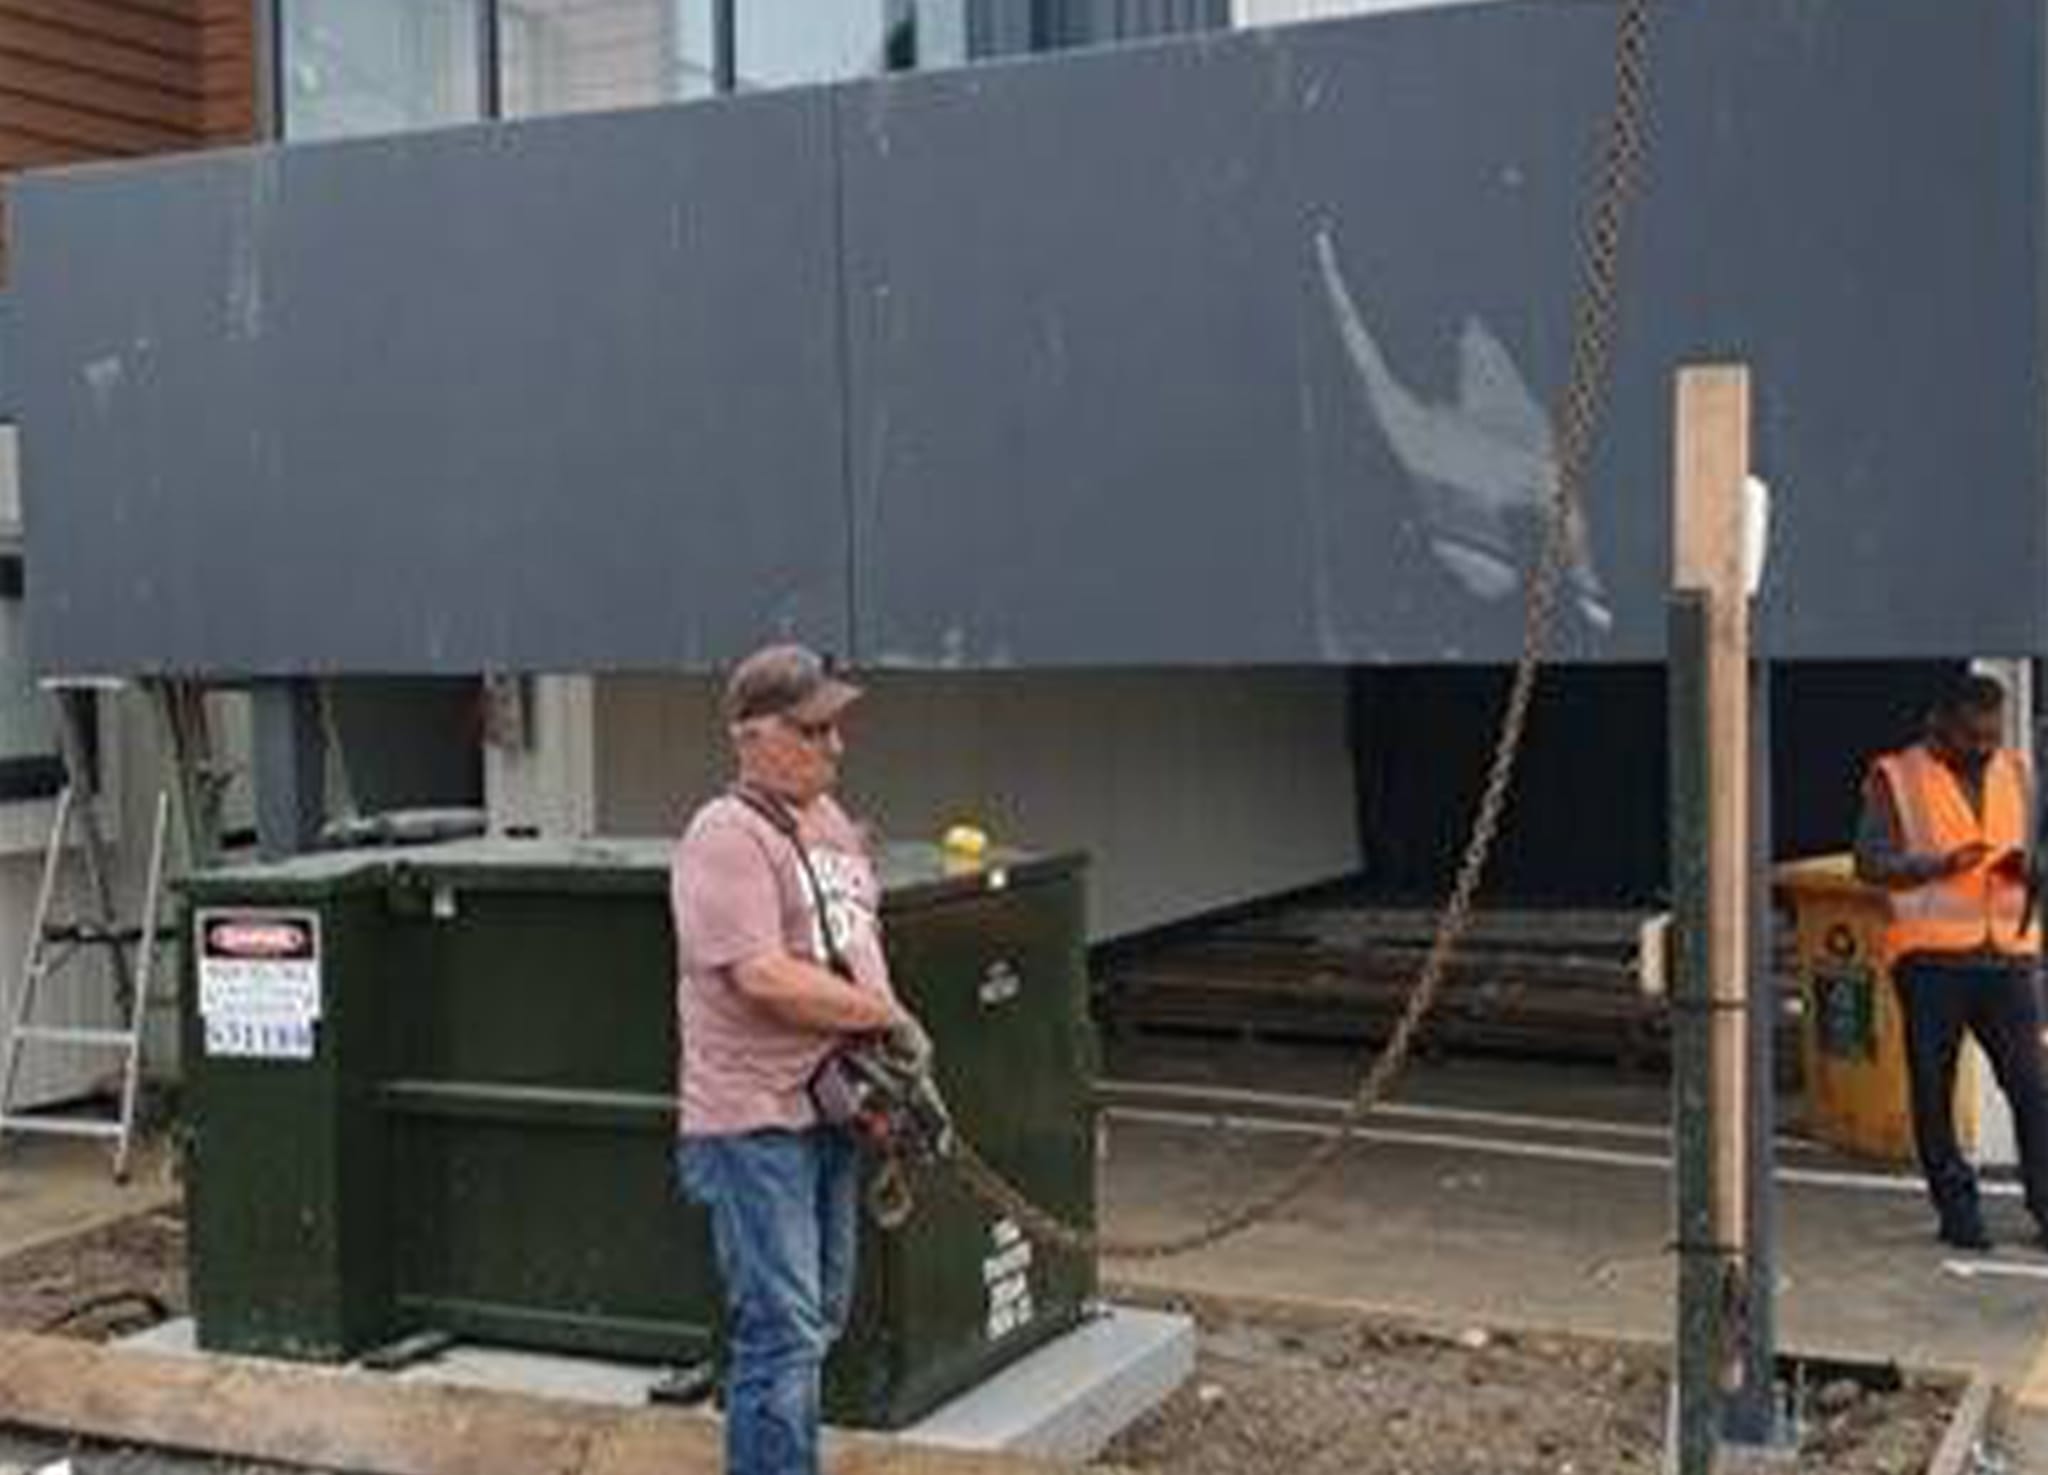 SL7 DG Panels were used for a 240/240/240 FRR blast protected wall to isolate a transformer near boundary.